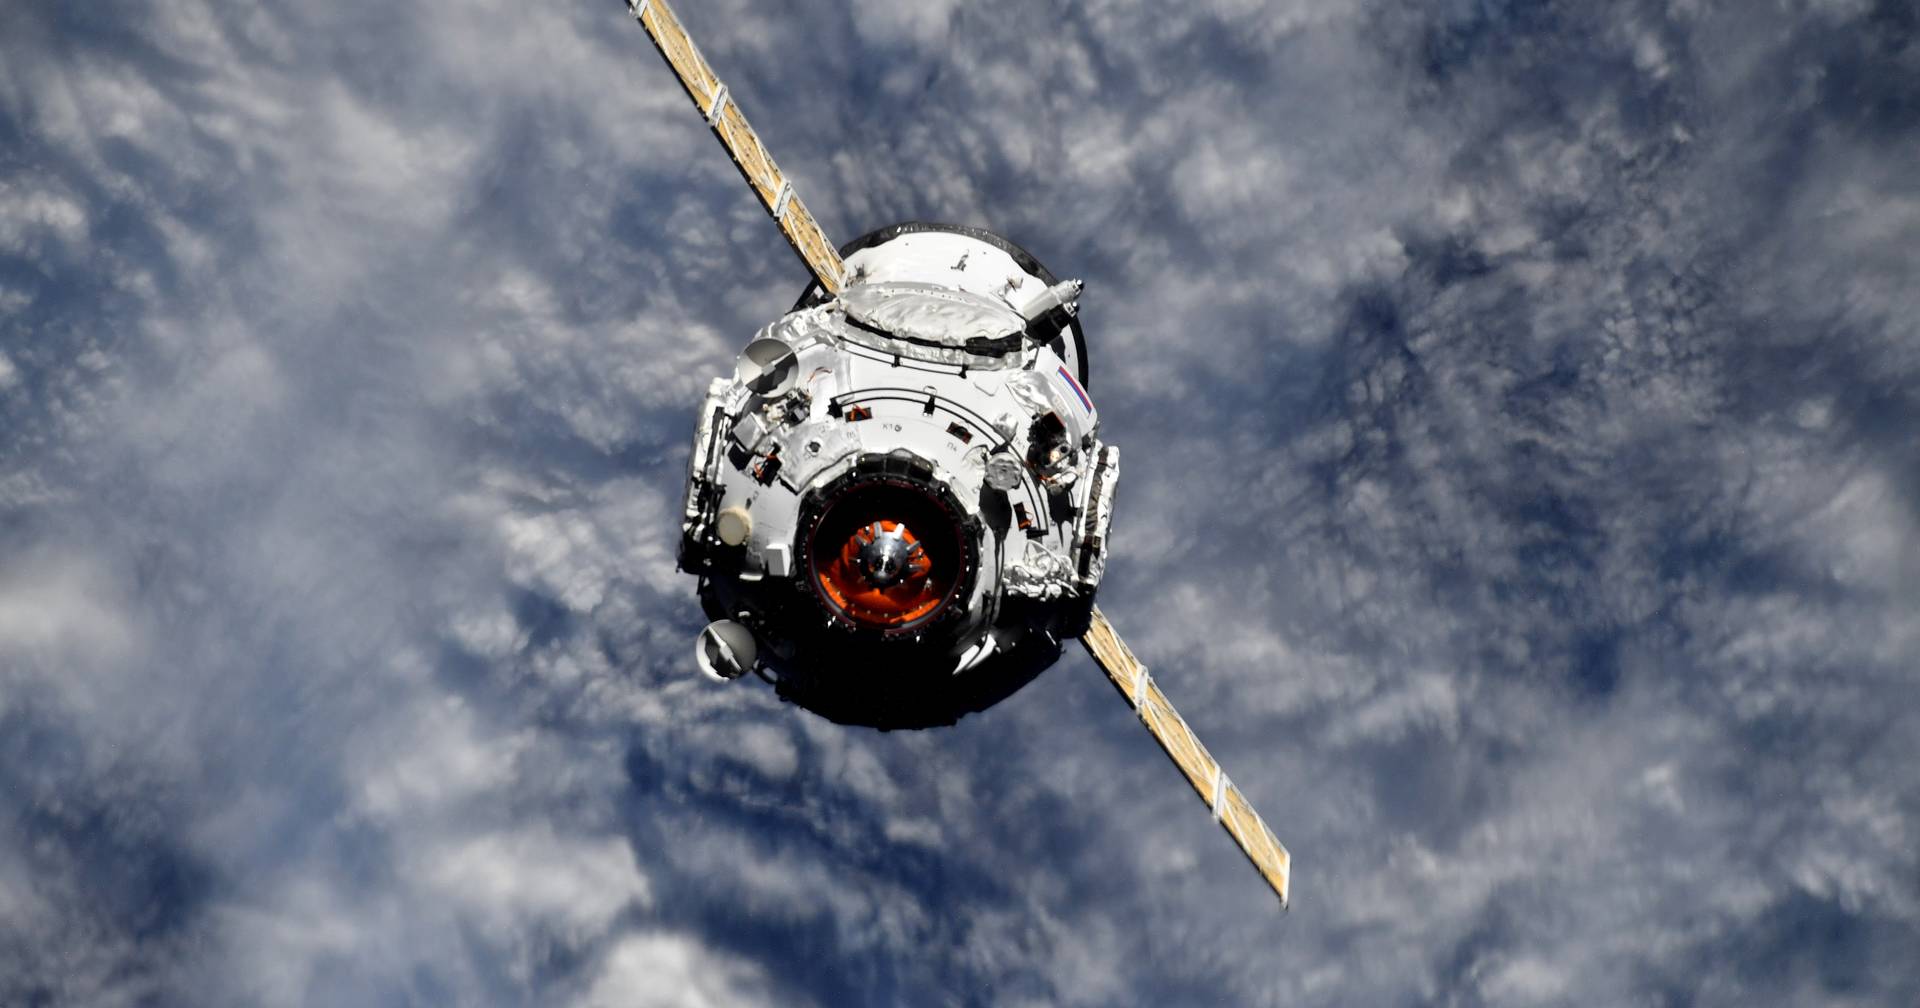 Despite the new escape, Russia guarantees the safety of the International Space Station